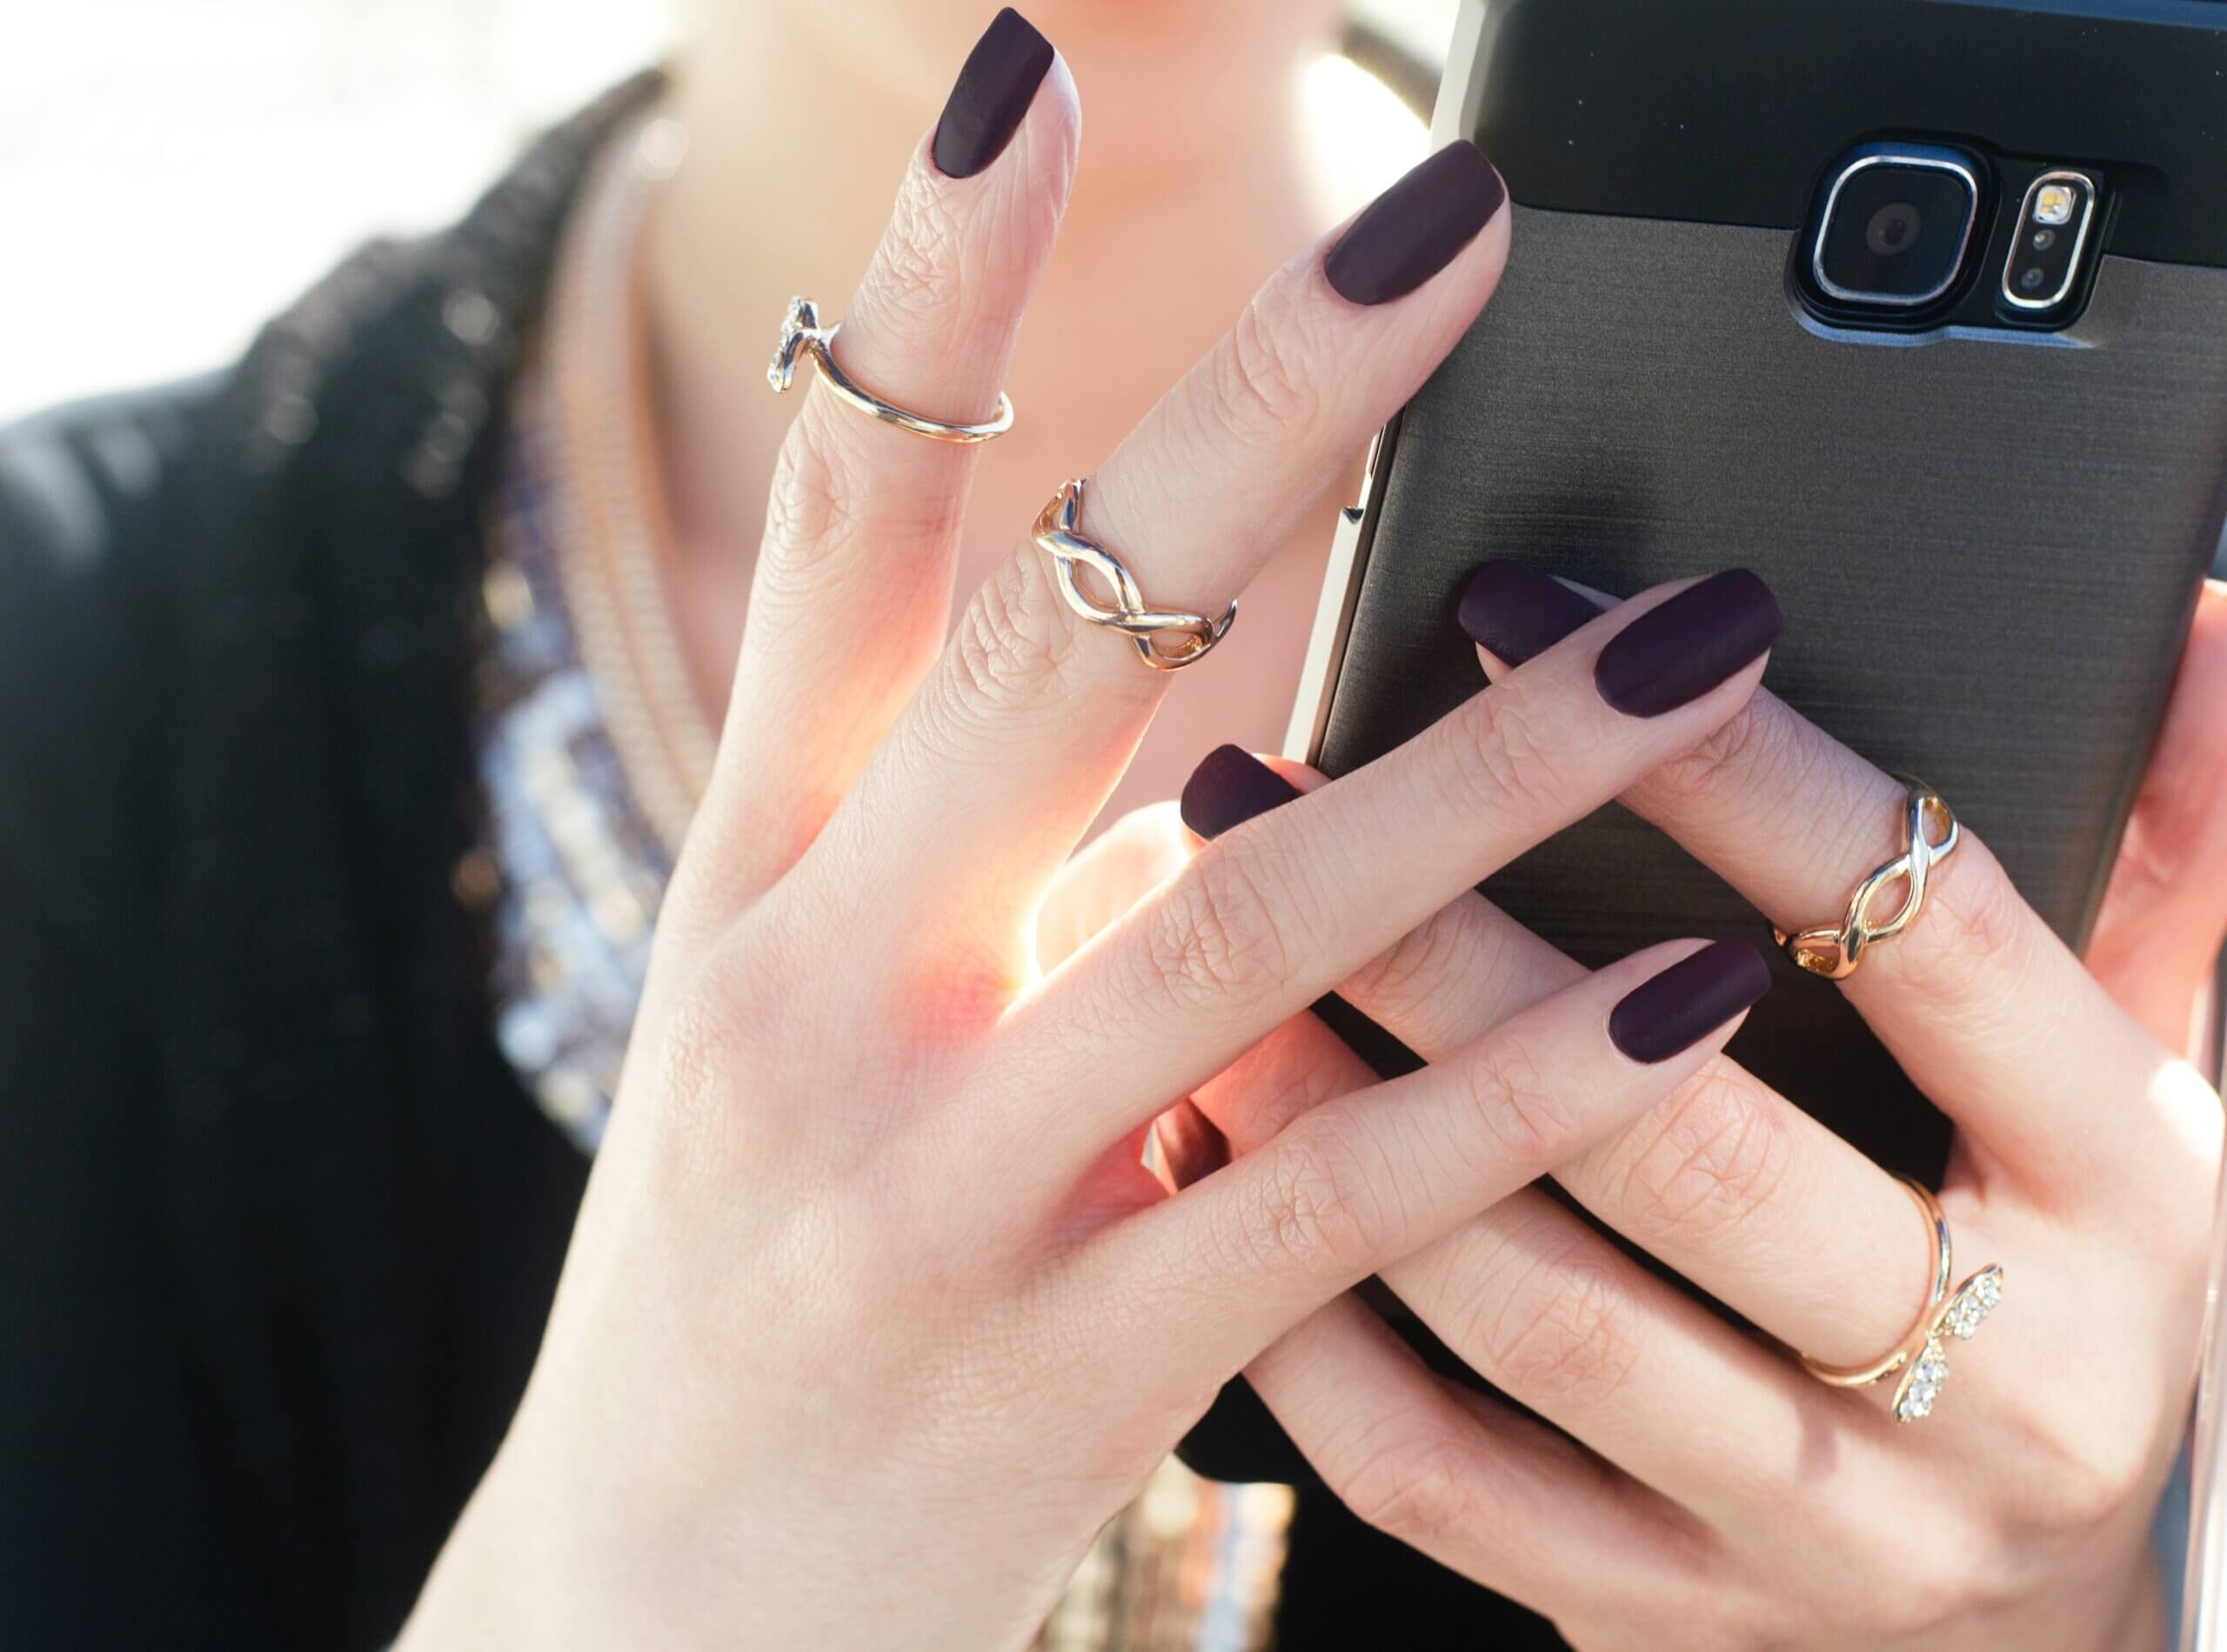 closeup of a woman's hands holding a cell phone